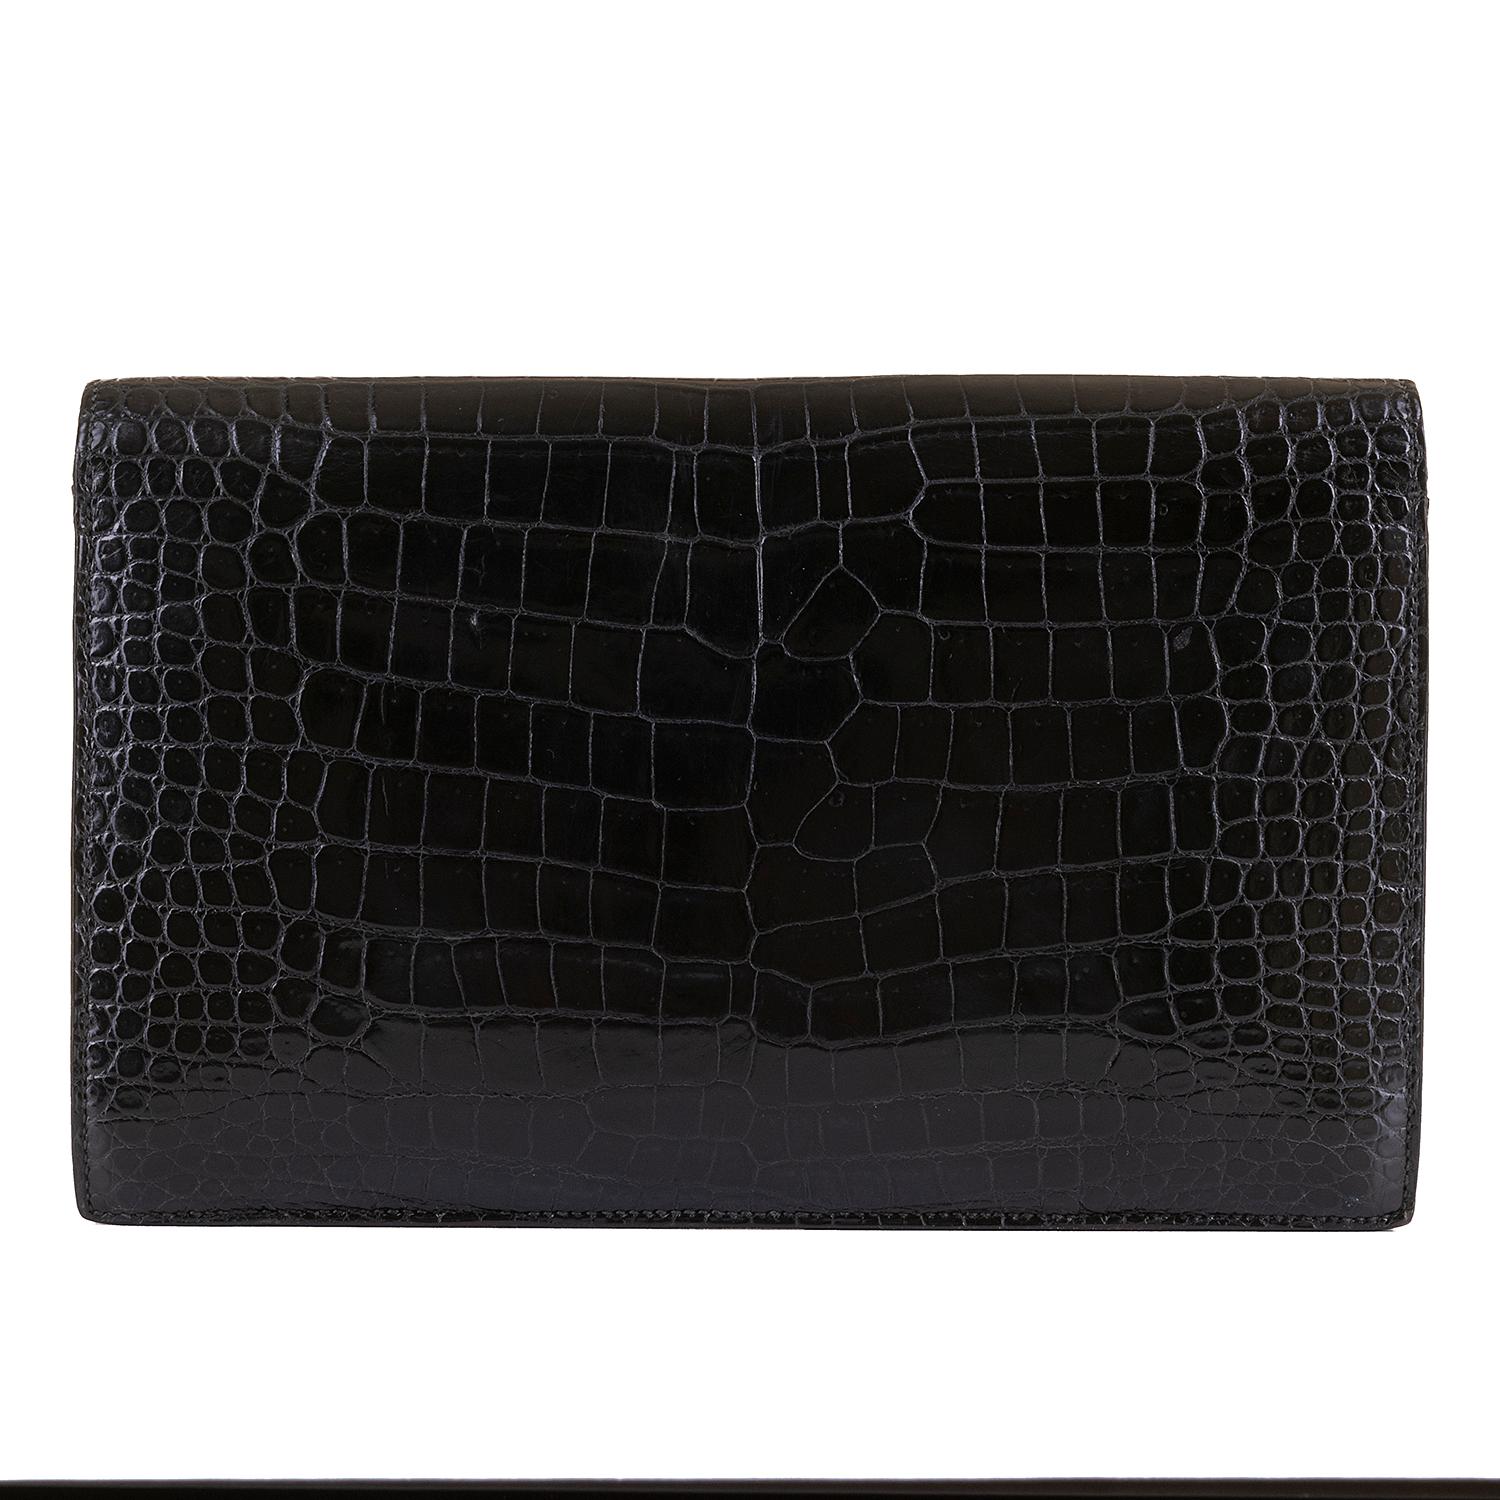 A very rare vintage Hermes 'Sac Lydia' Envelope Black Crocodile Evening Bag. In excellent condition throughout, the bag, with it's detachable Crocodile Strap, can be worn as either a clutch or shoulder bag. With gold hardware, this beautiful bag is